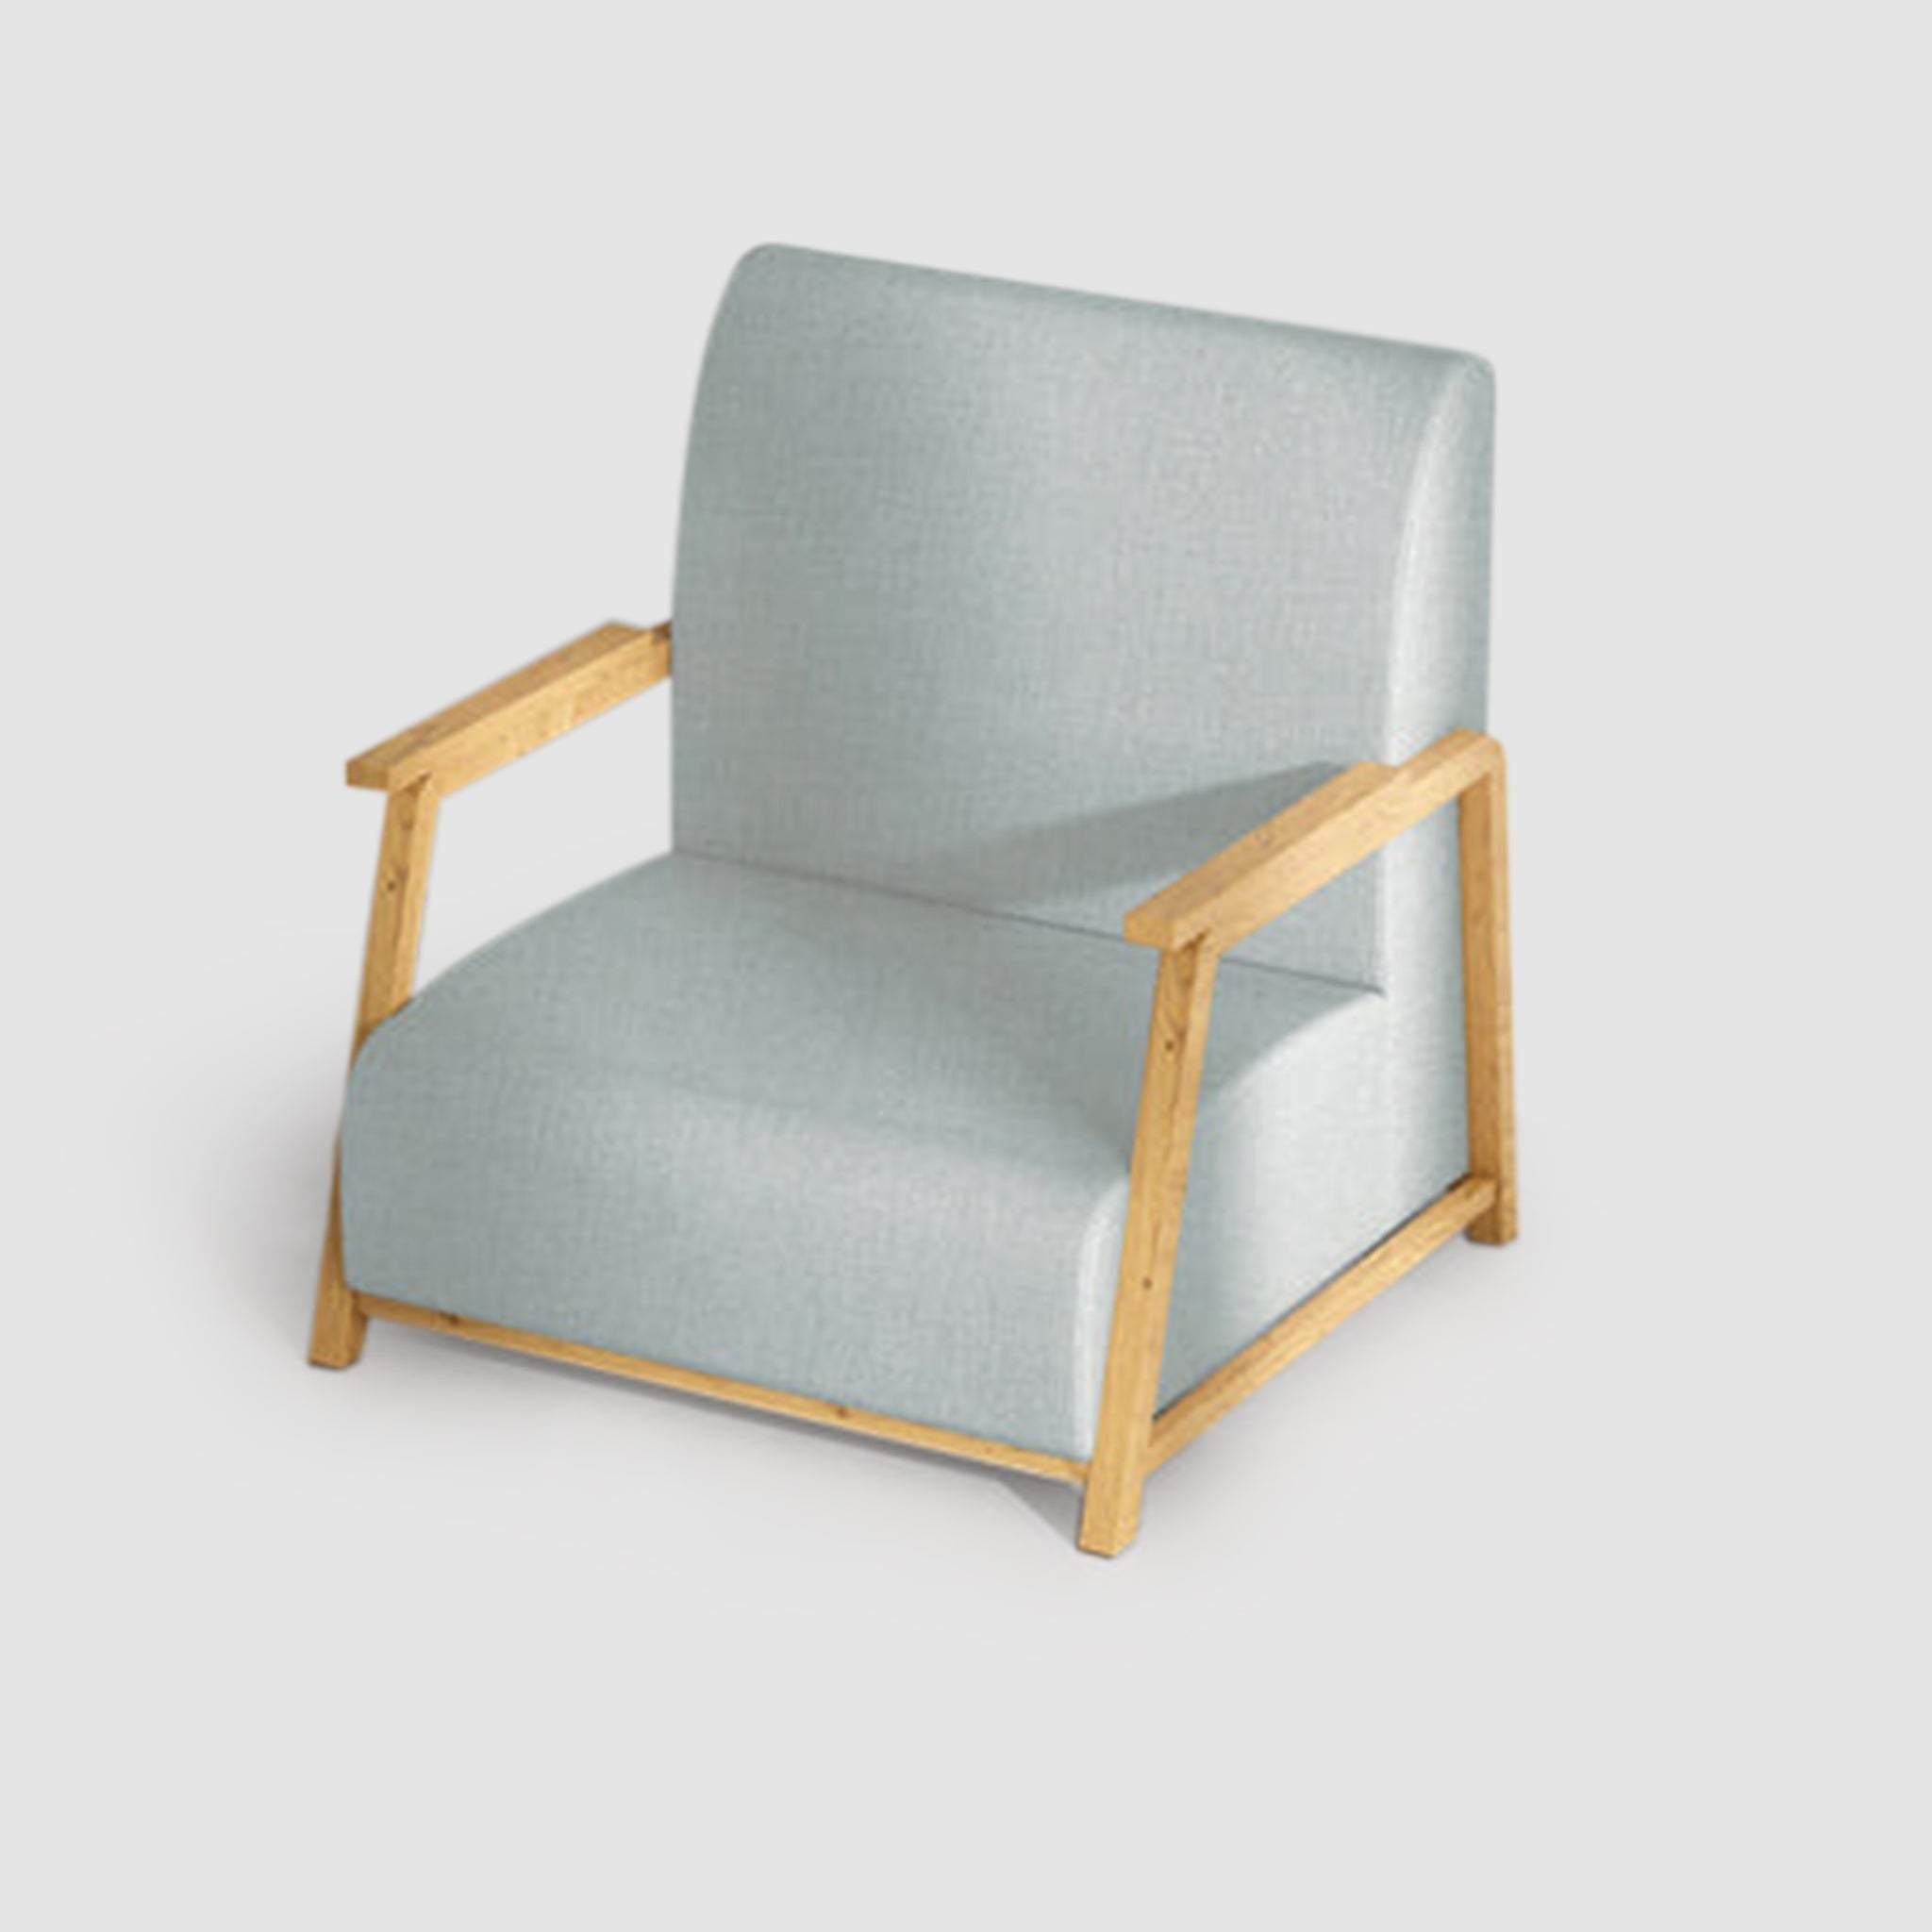 Comfortable The Dixon Arm Accent Chair with natural wooden accents.